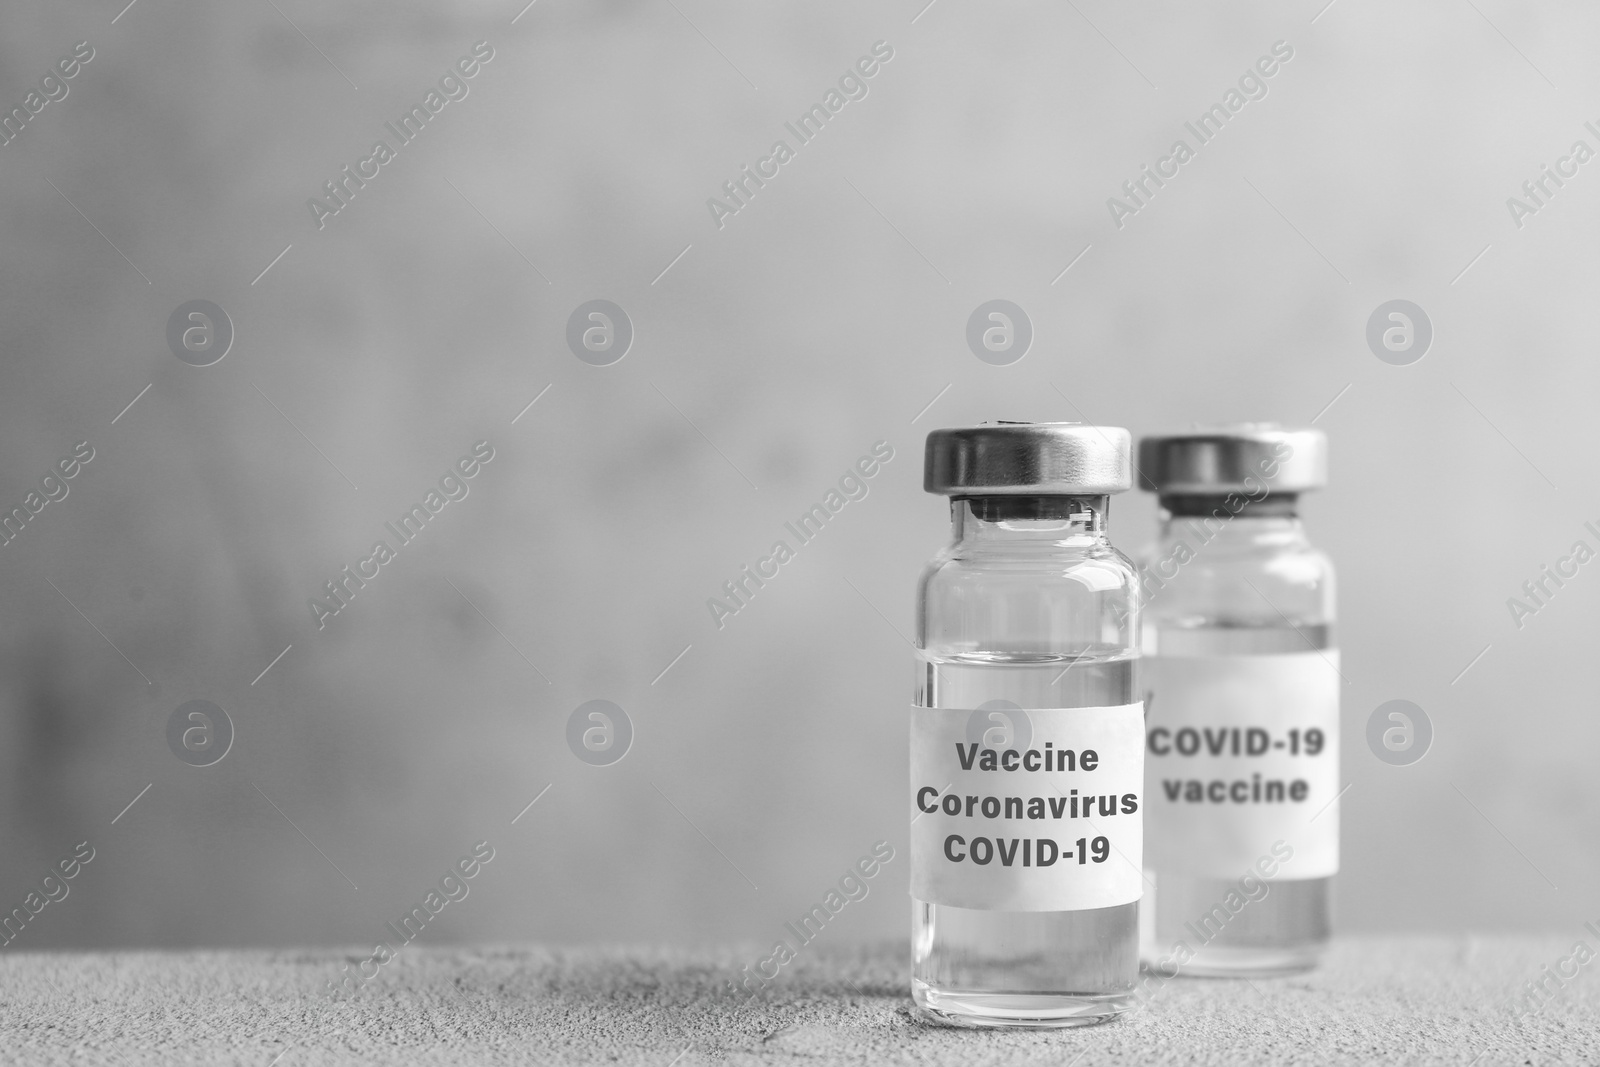 Image of Coronavirus vaccine on grey table, space for text